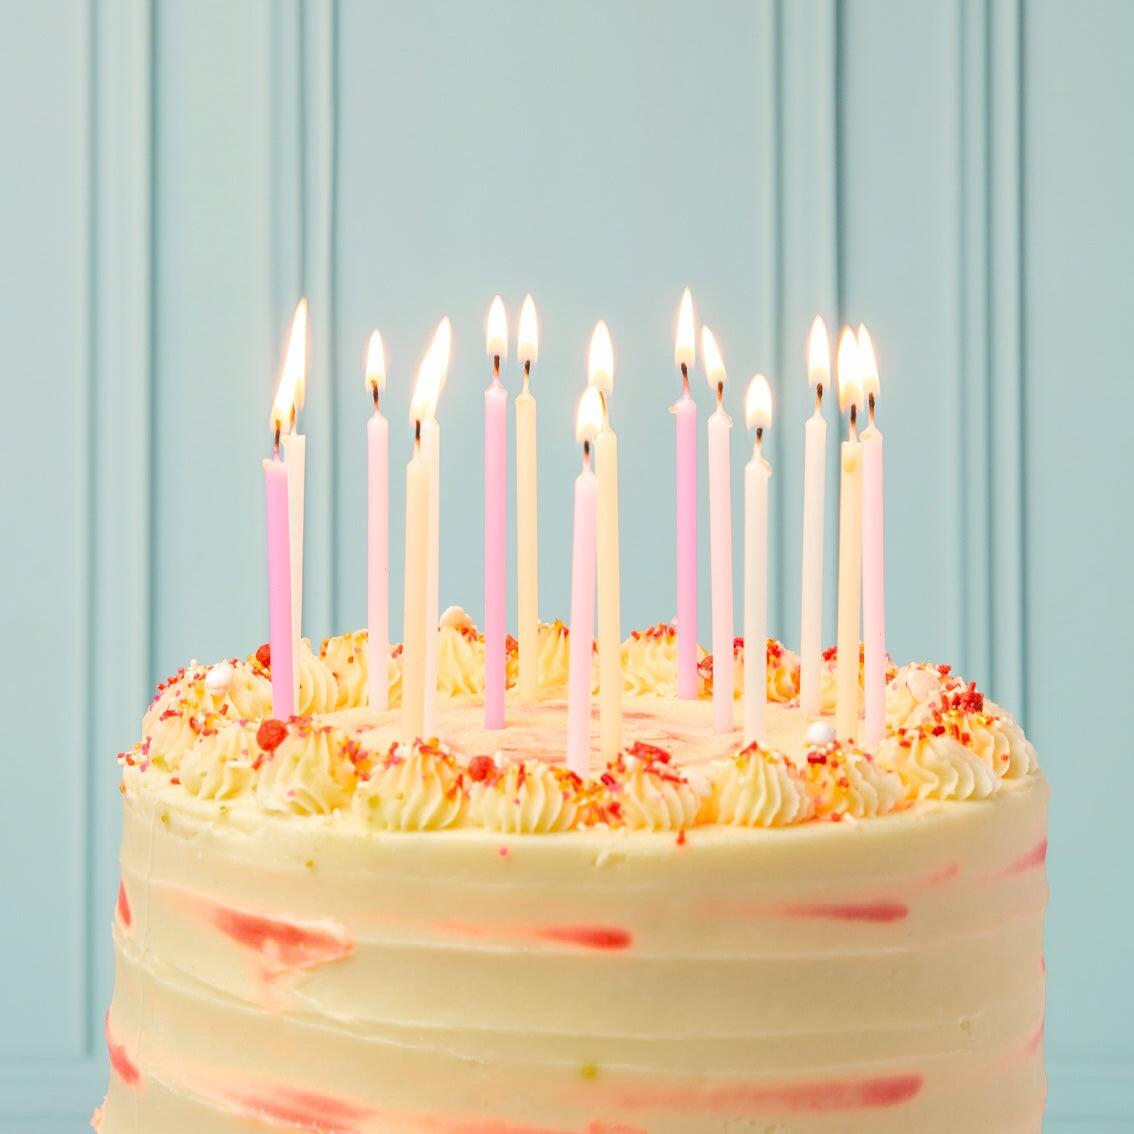 Tall 10cm pastel party candles